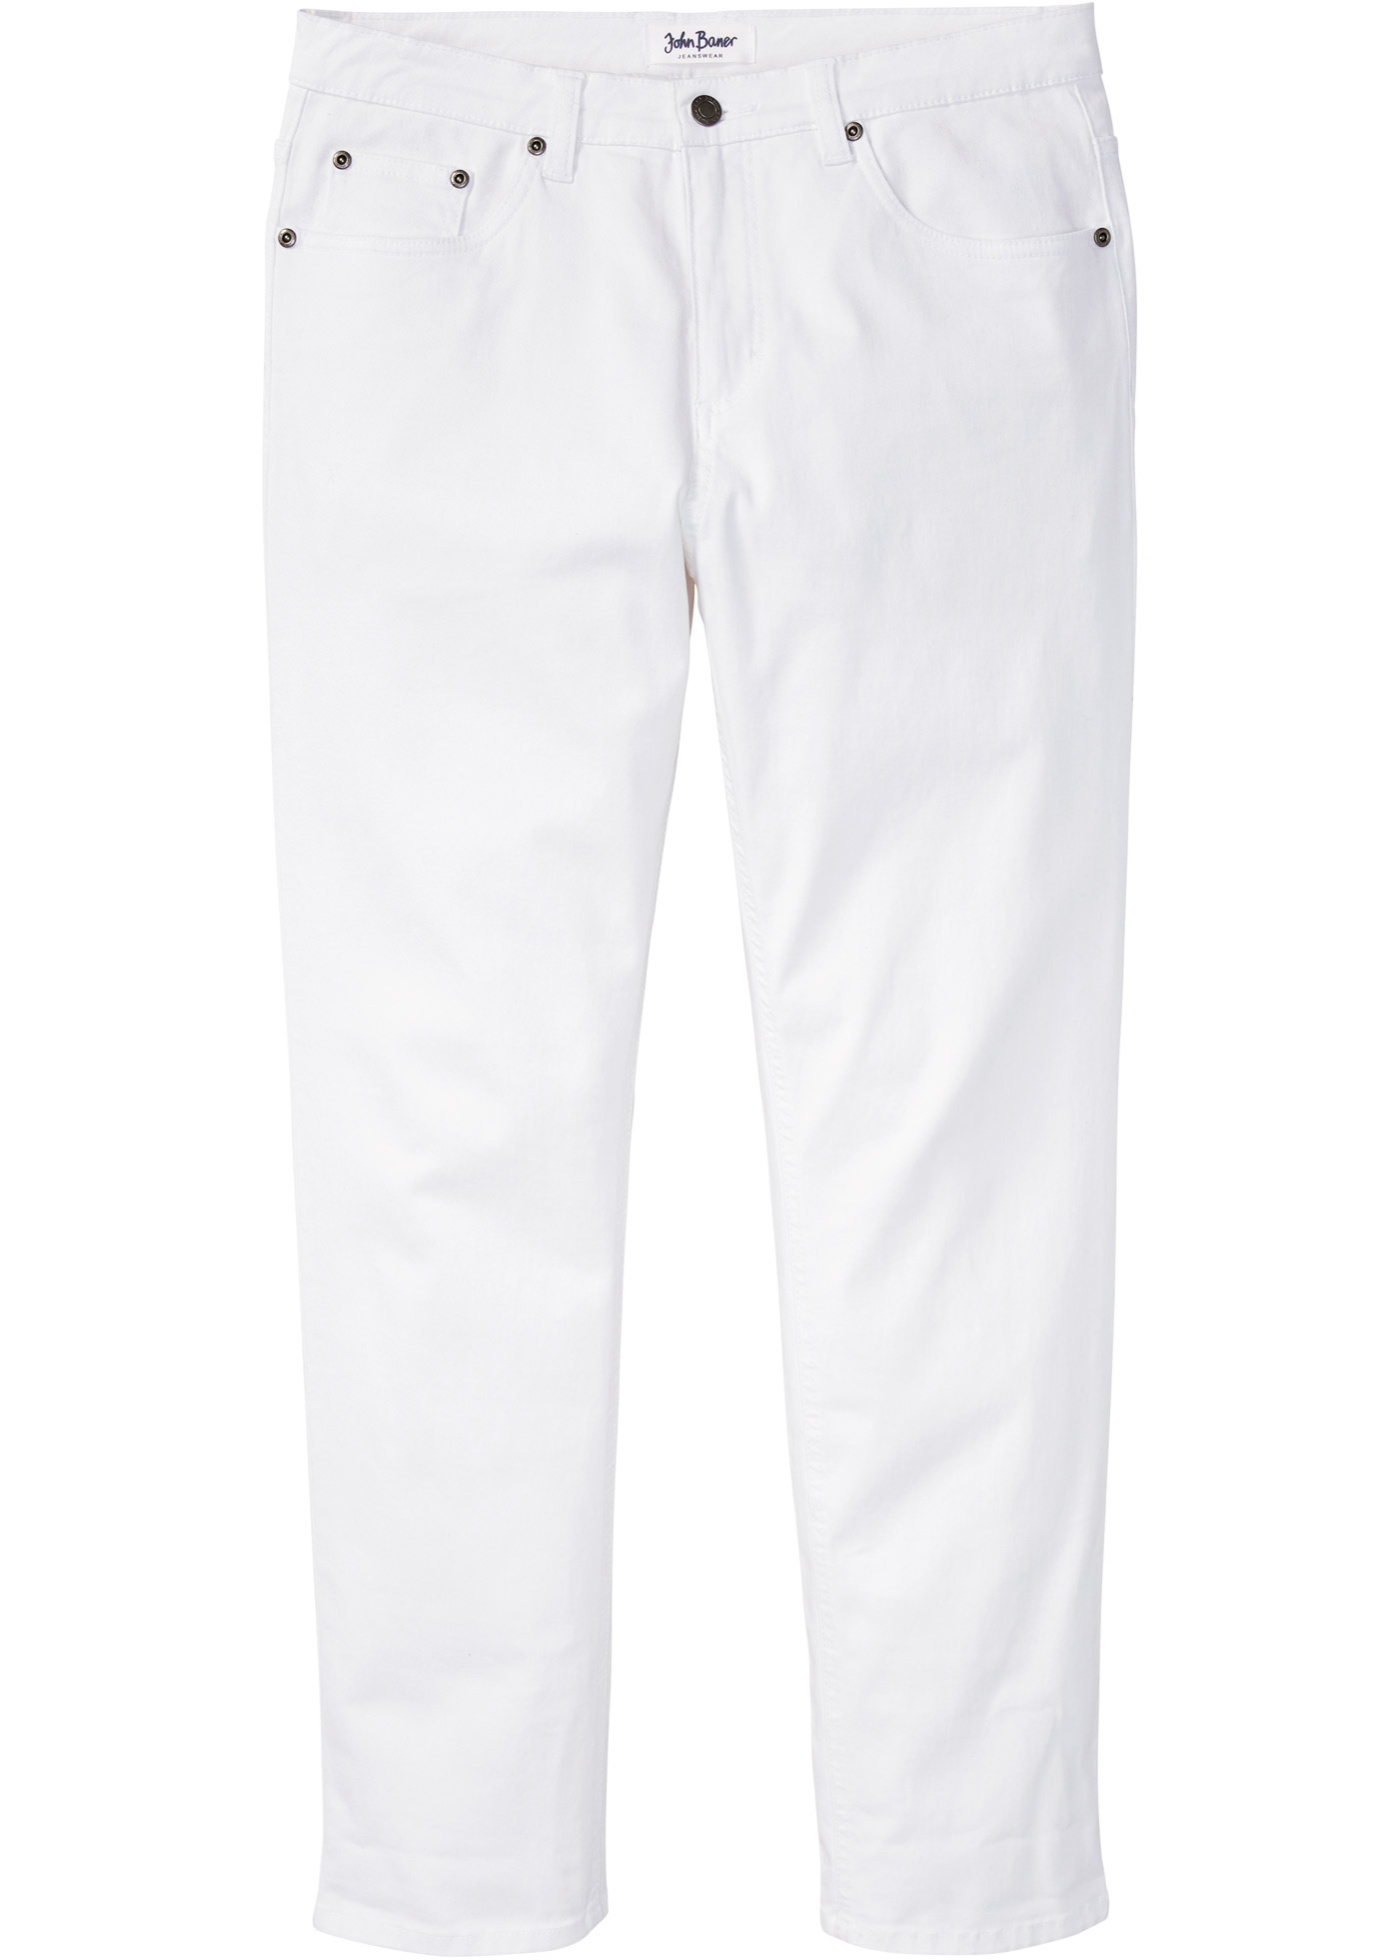 Classic fit stretch jeans, tapered